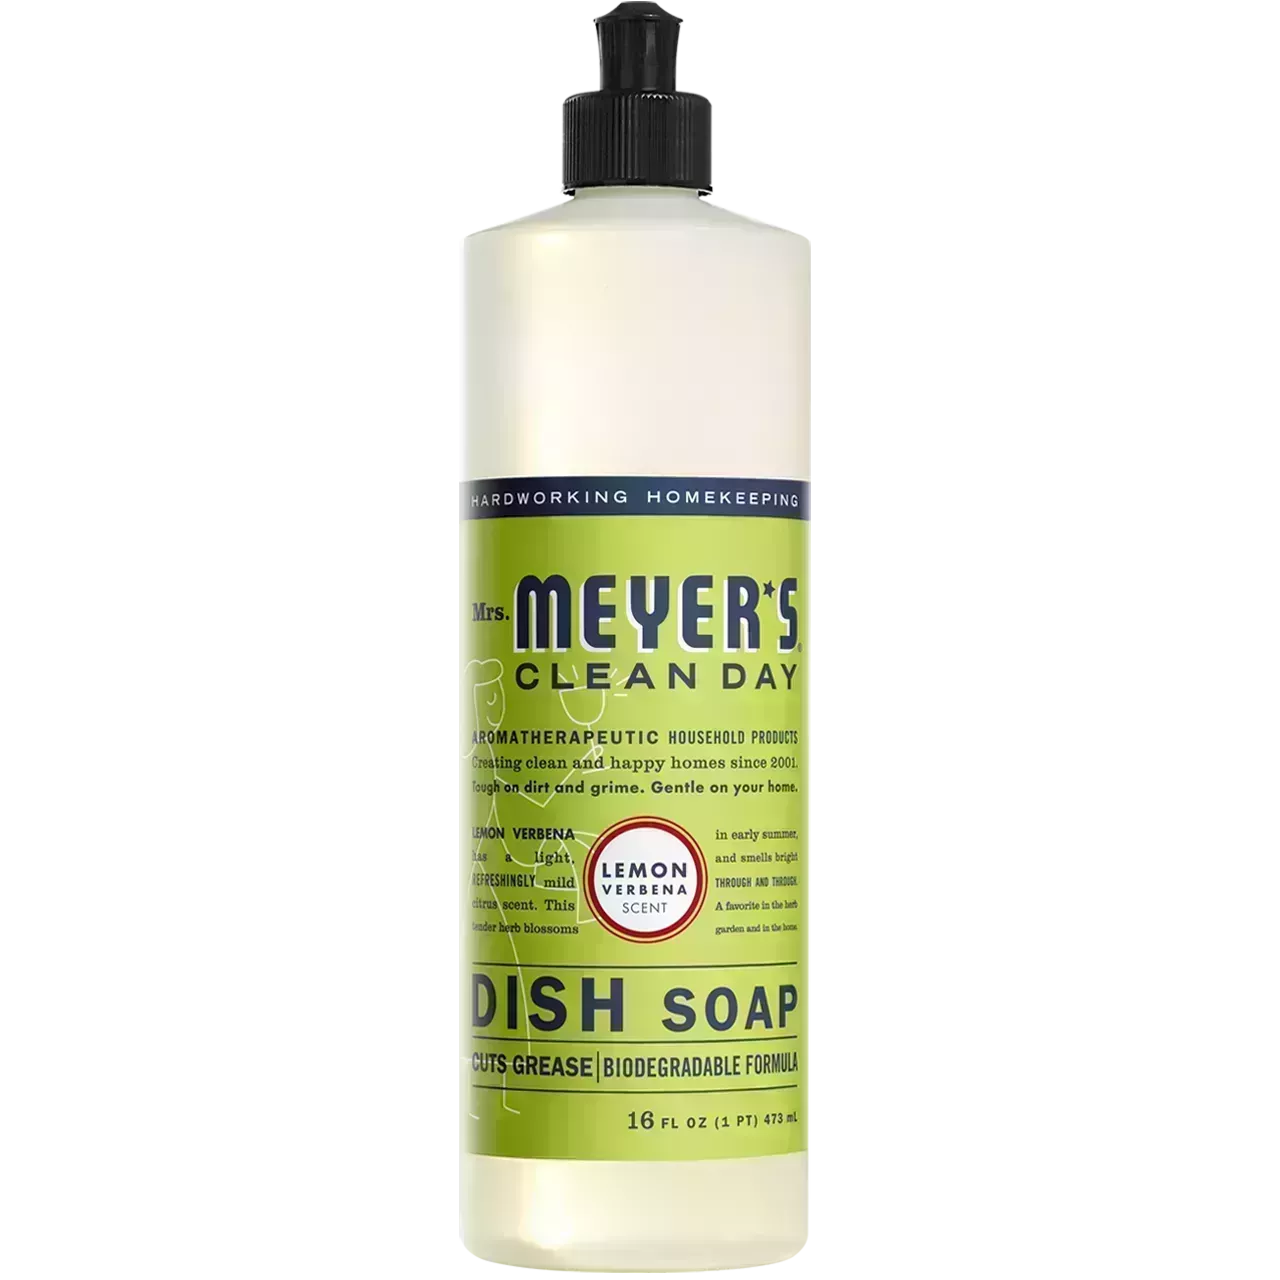 Mrs. Meyer's Clean Day Dish Soap on white background